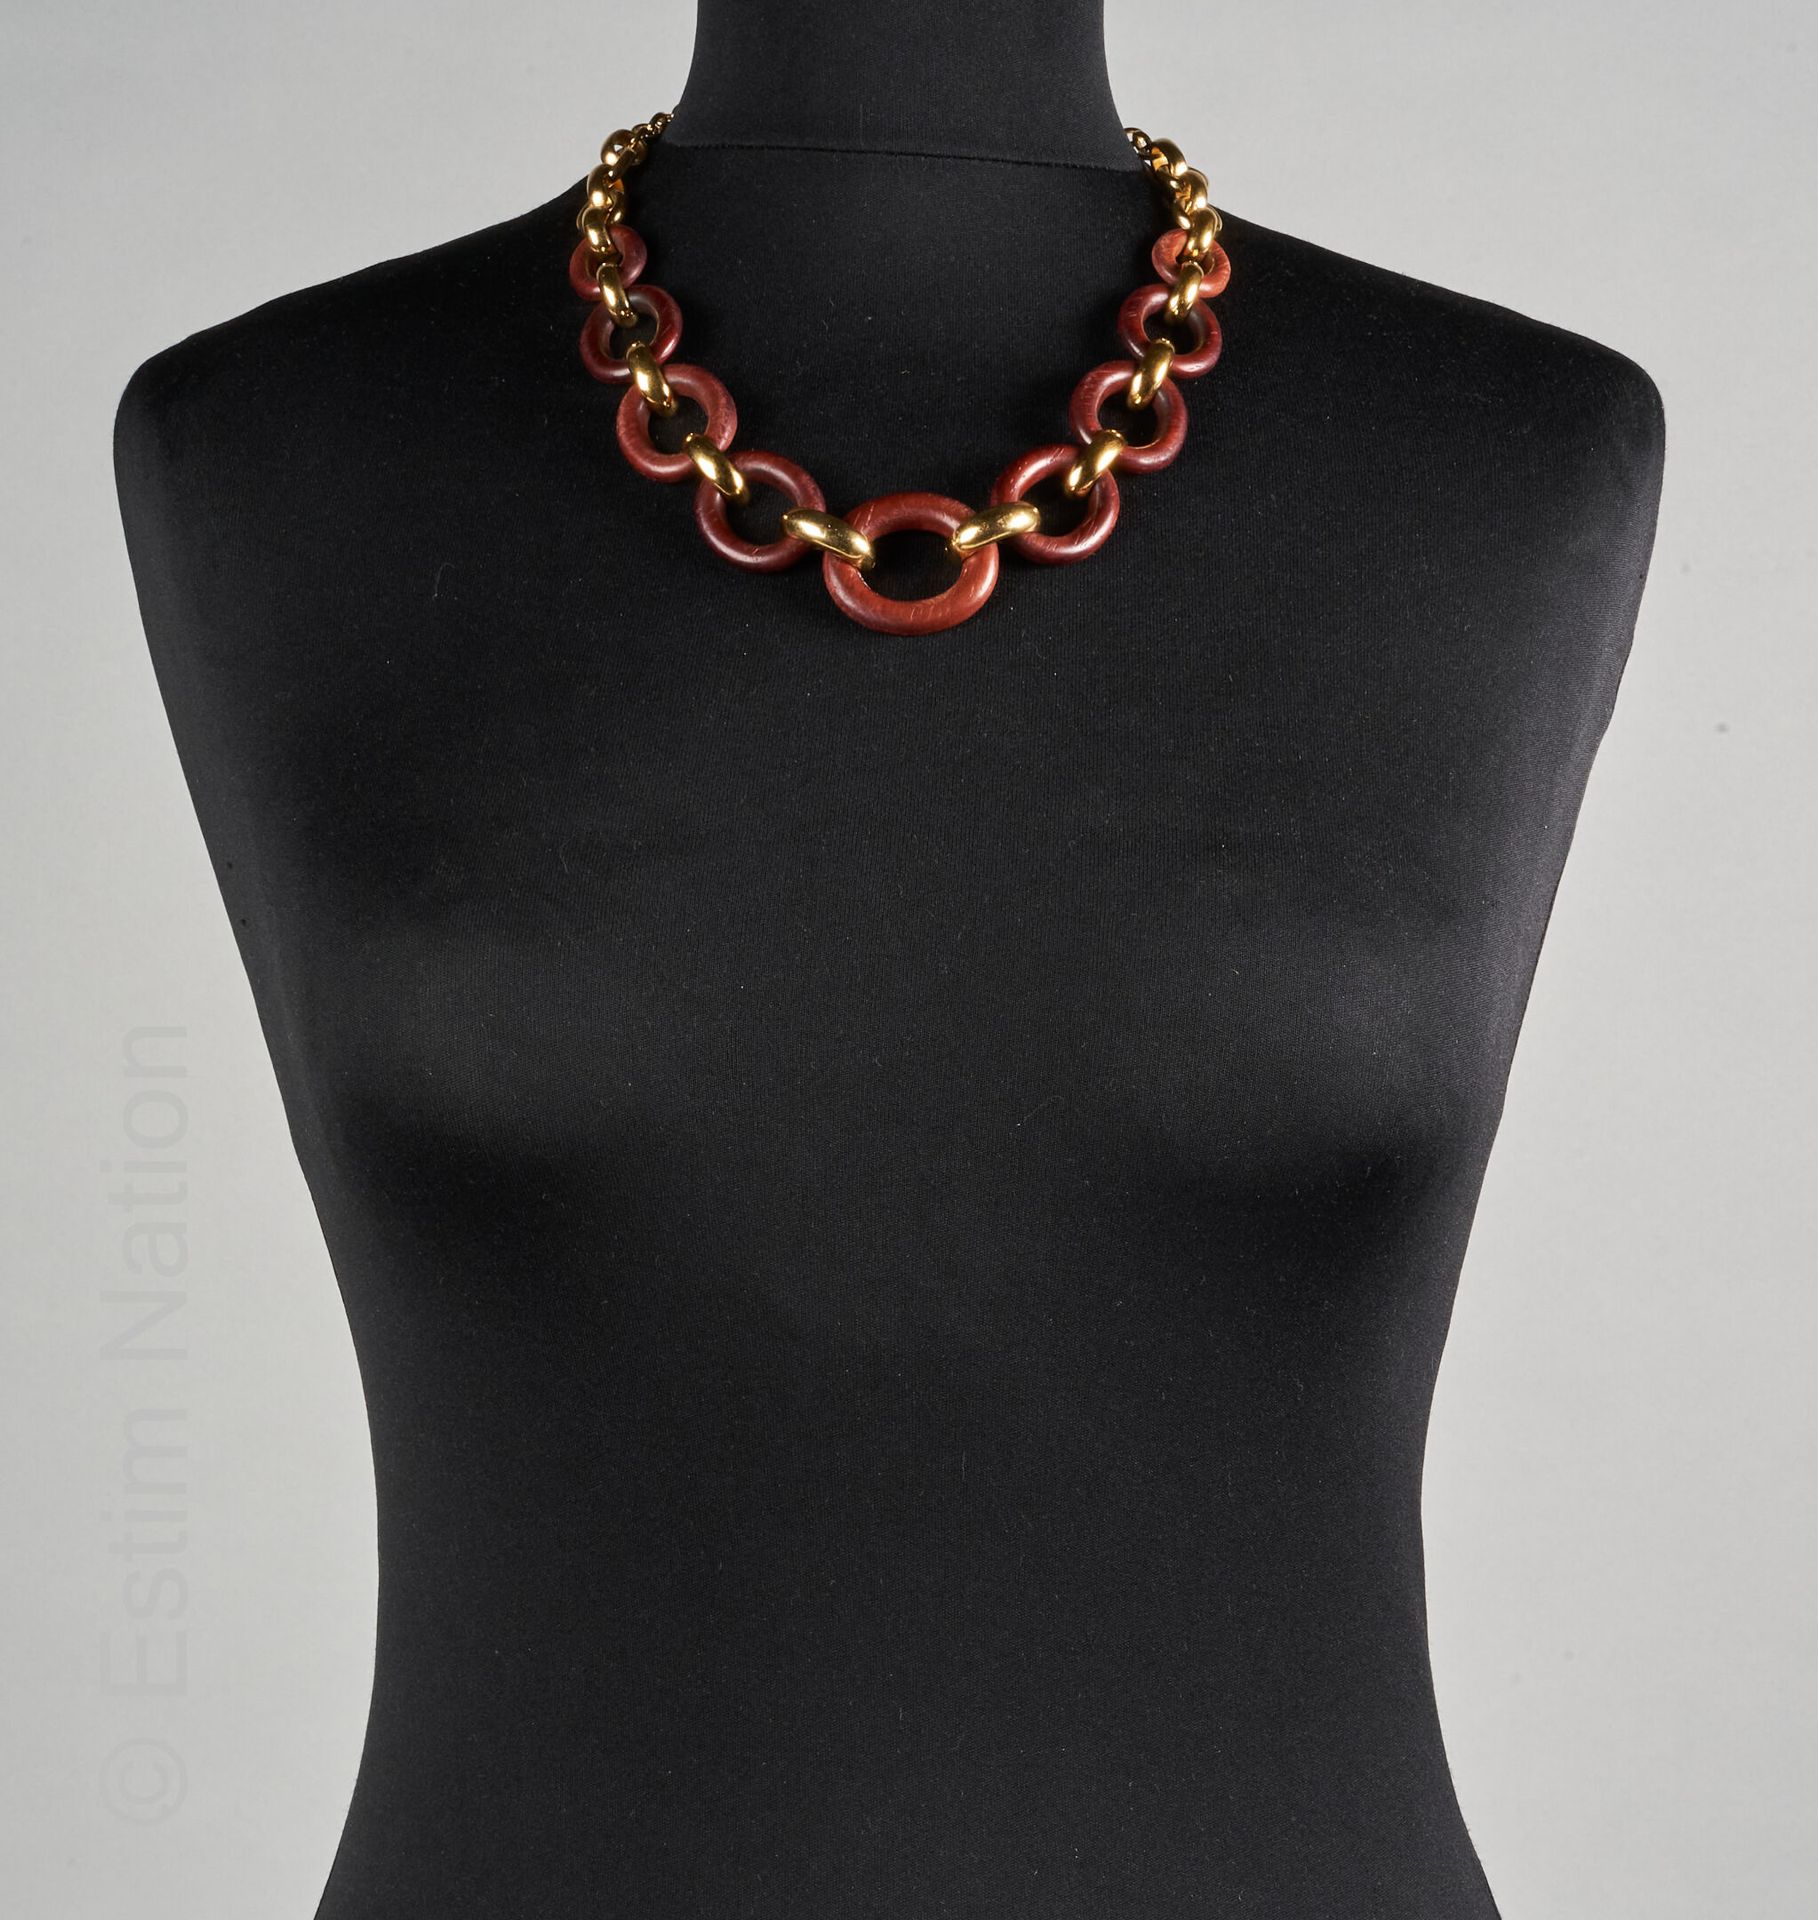 Yves Saint LAURENT NECKLACE link in gilded metal and wood (signed on plate)